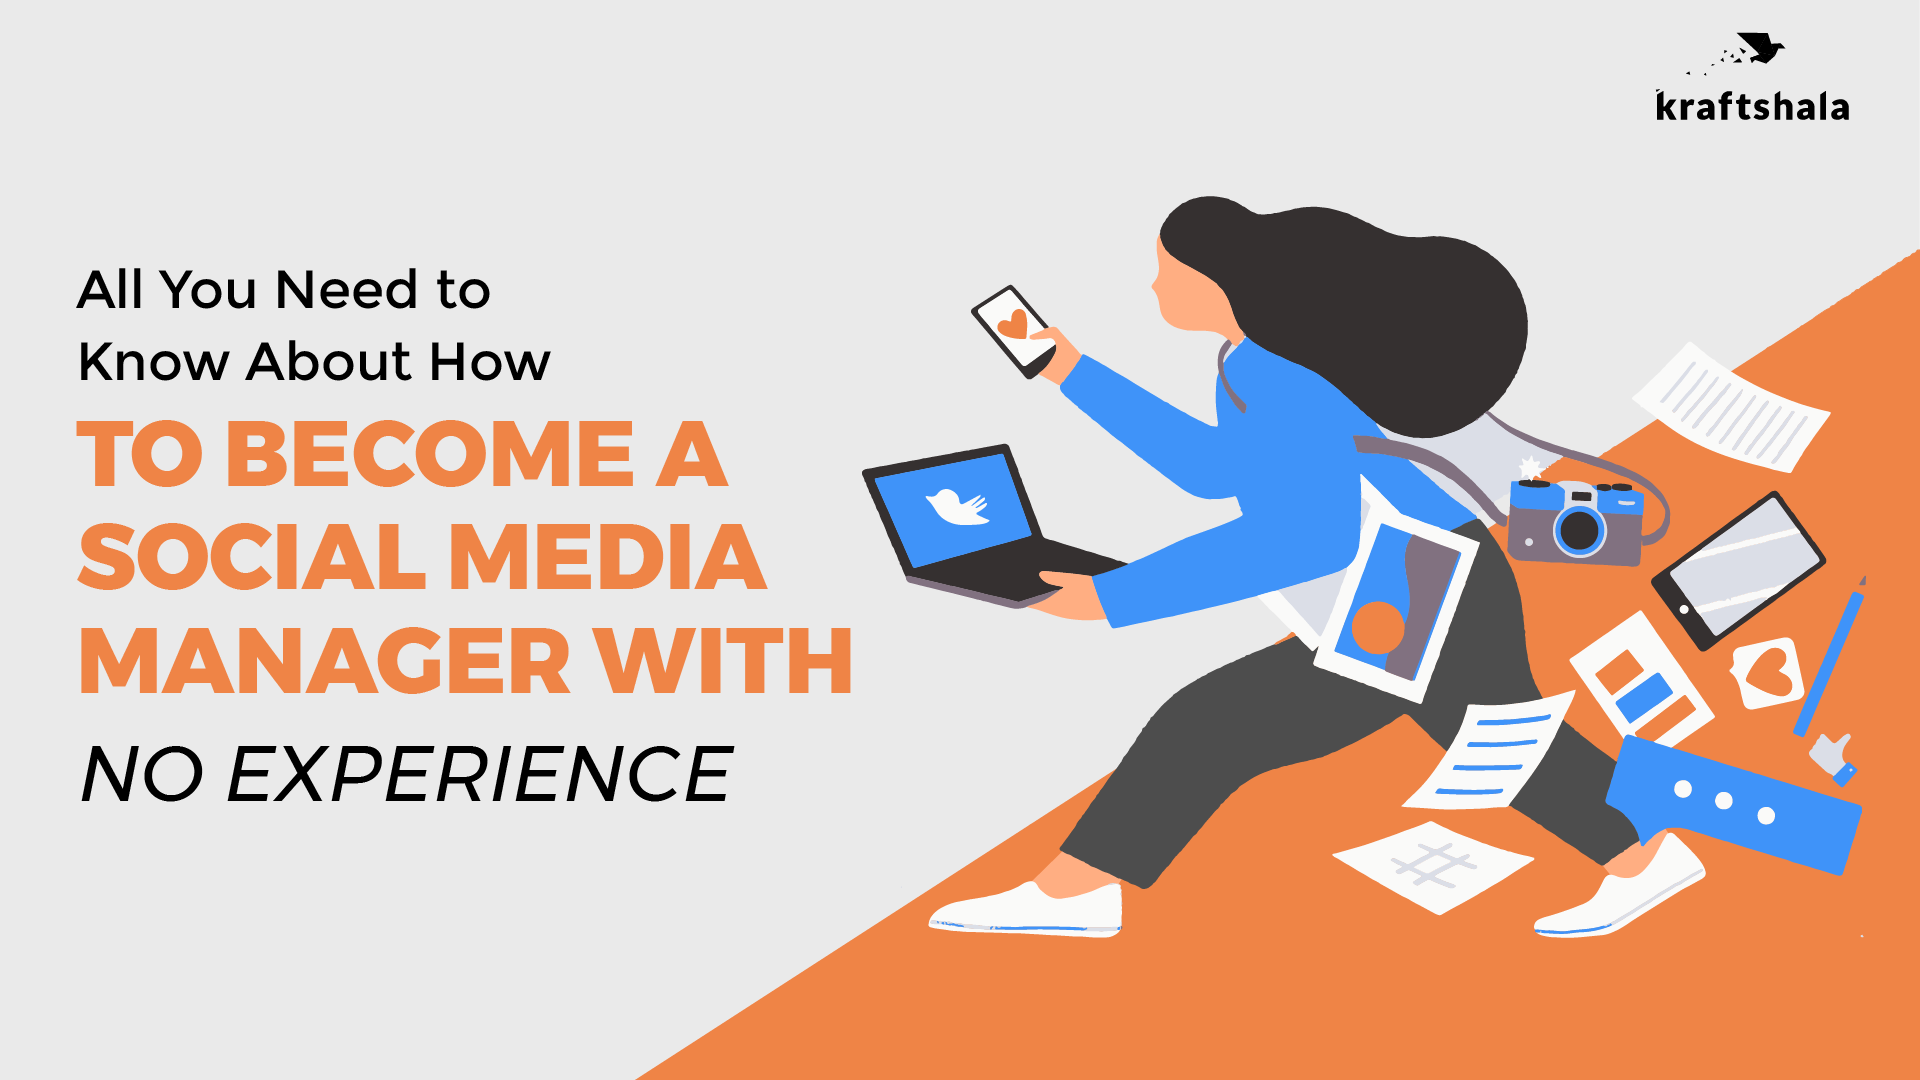 How to Become a Social Media Manager with No Experience